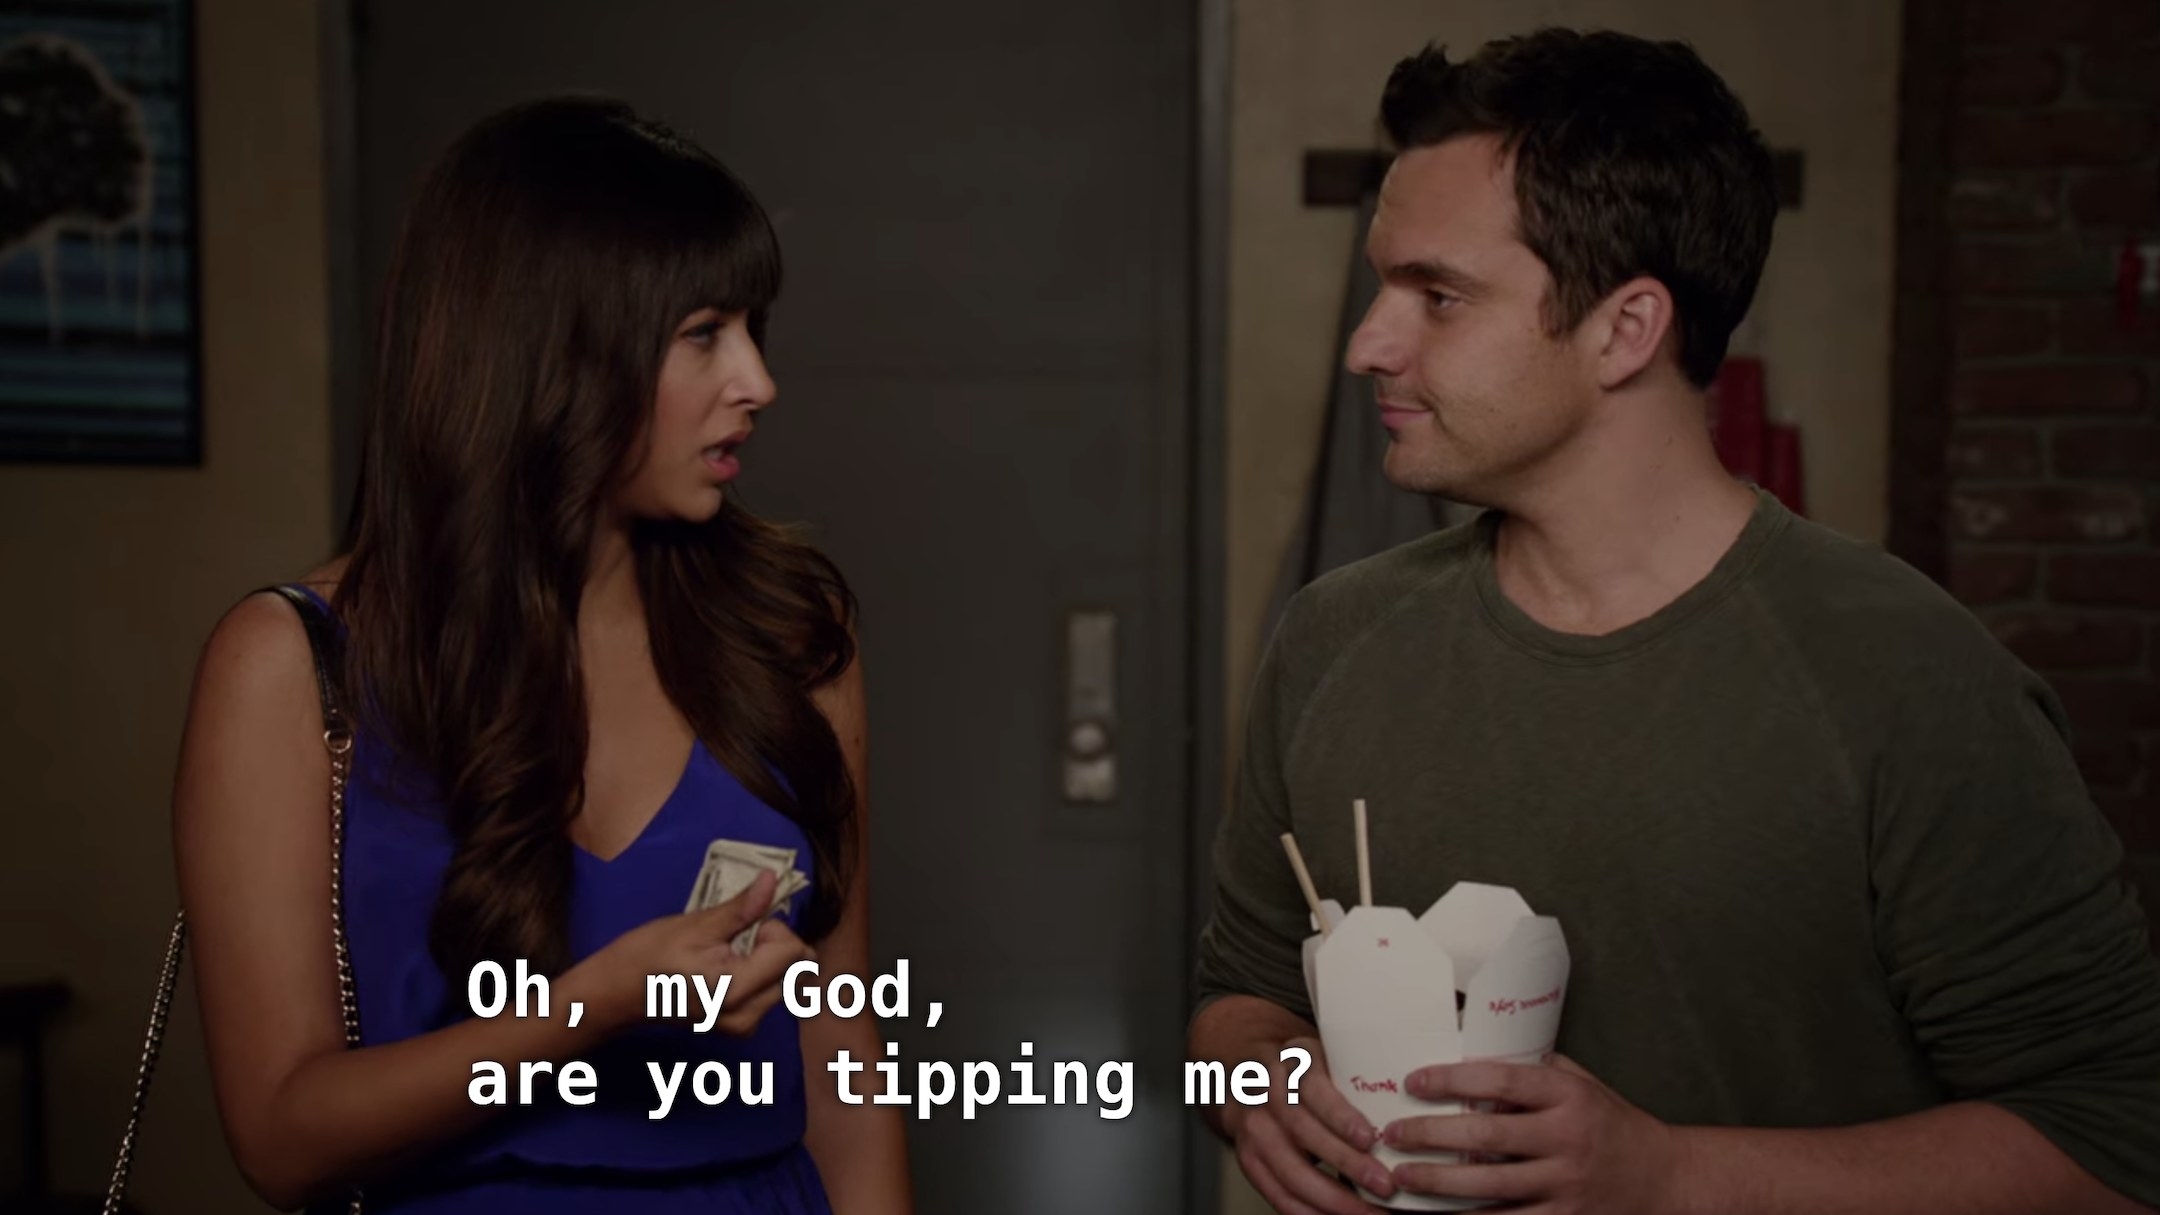 Cece says, Oh my god, are you tipping me